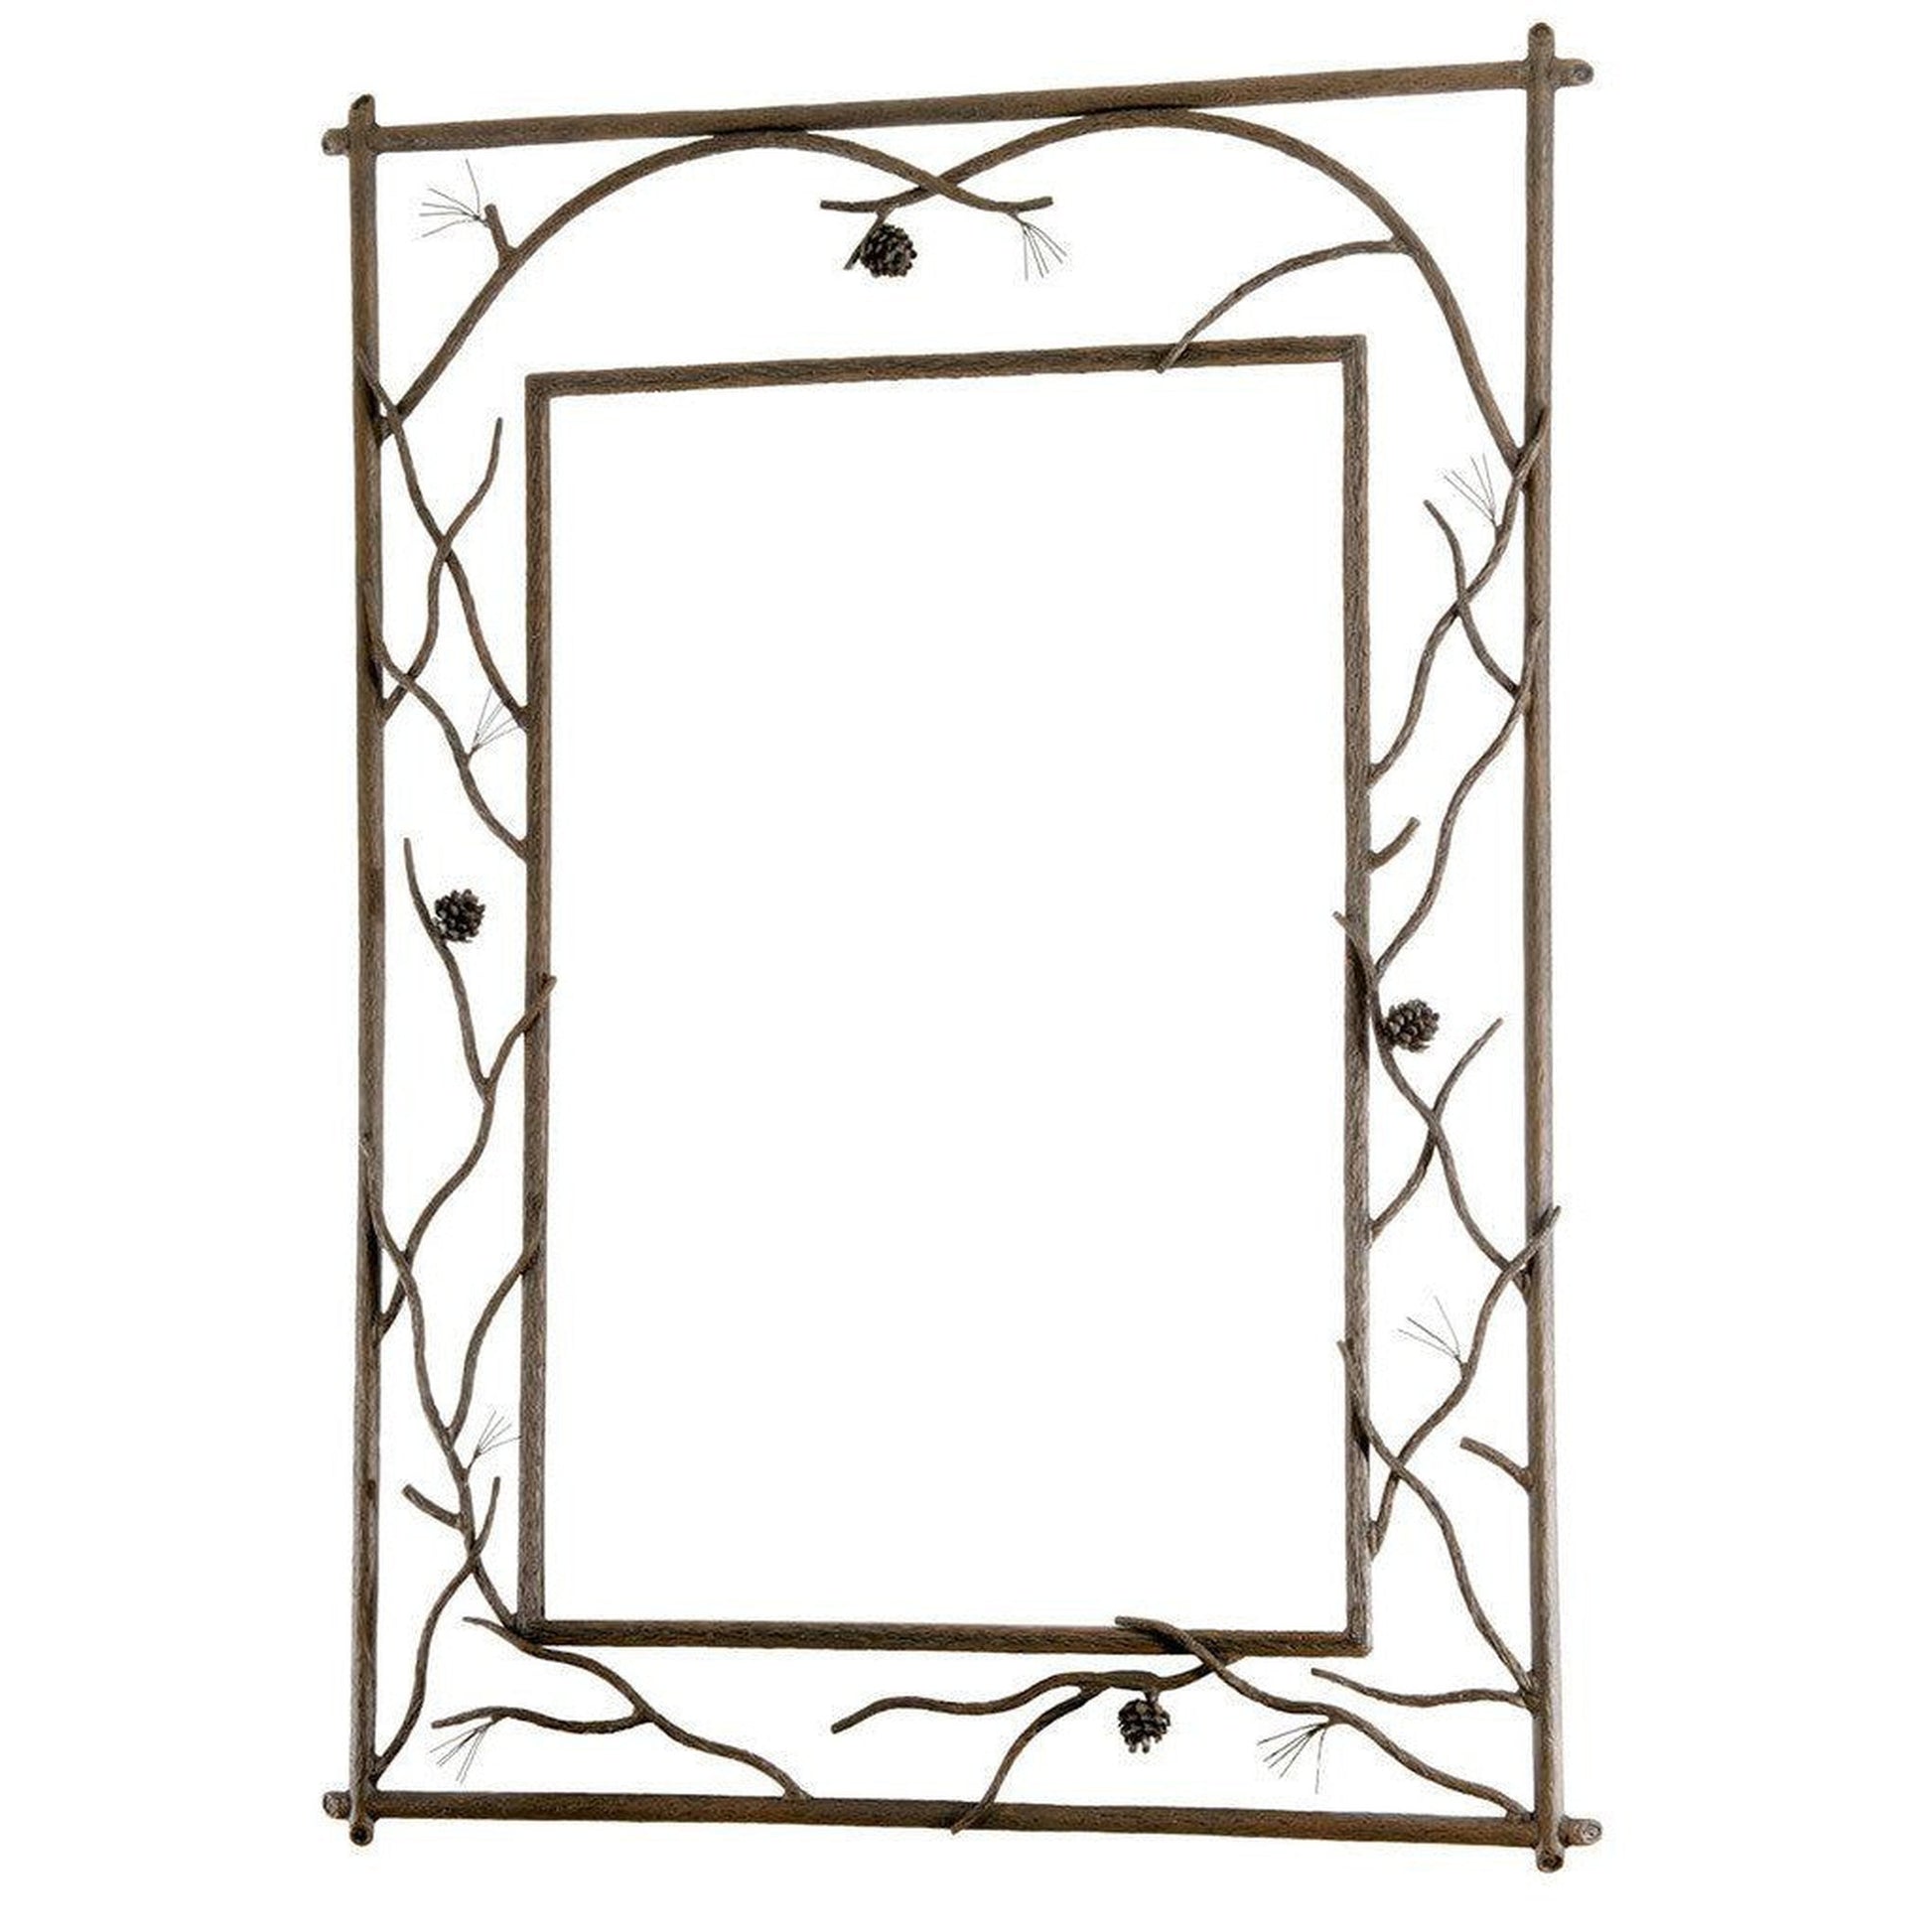 Stone County Ironworks Pine 29" x 35" Small Hand Rubbed Brass Branched Iron Wall Mirror With Pewter Iron Accent